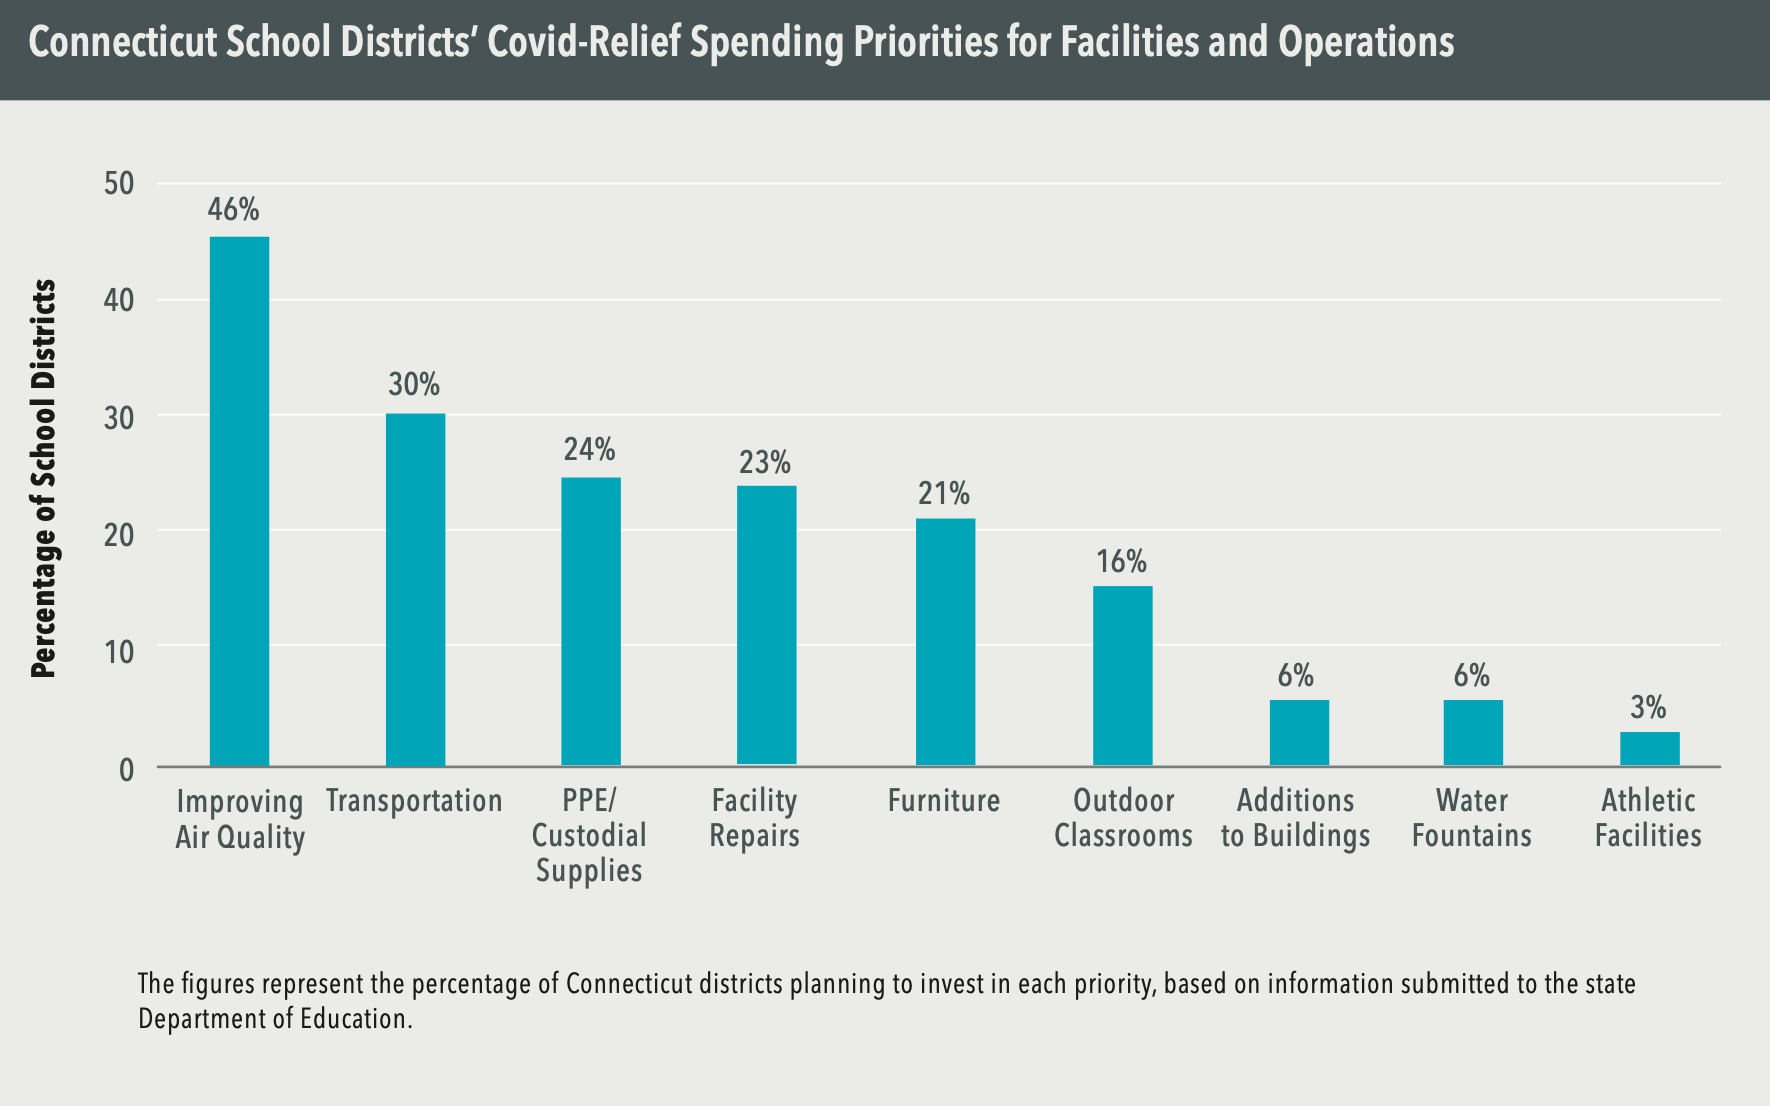 Chart: Connecticut School Districts' Covid-Relief Spending Priorities for Facilities and Operations. Percentage of school districts. Improving air quality: 46%. Transportation: 30%. PPE/Custodial Supplies: 24%. Facility Repairs: 23%. Furniture: 21%. Outdoor classrooms: 16%. Additions to buildings: 6%. Water fountains: 6%. Athletic facilities: 3%. (The figures represent the percentage of Connecticut districts planning to invest in each priority, based on information submitted to the state Department of Education.)